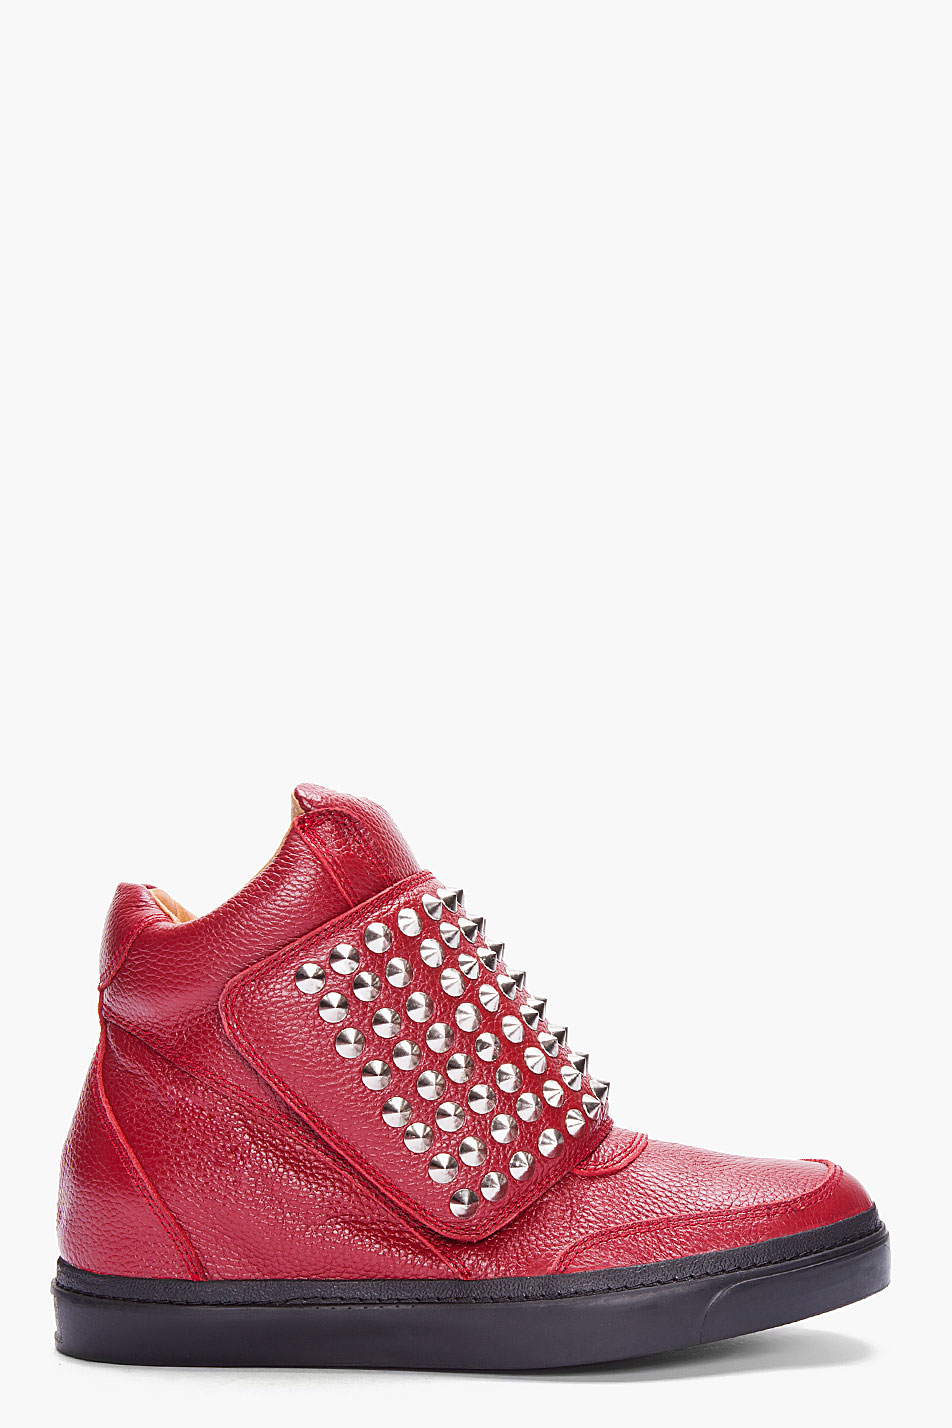 Jeffrey Campbell Red Prism Studded Sneakers in Red for Men | Lyst